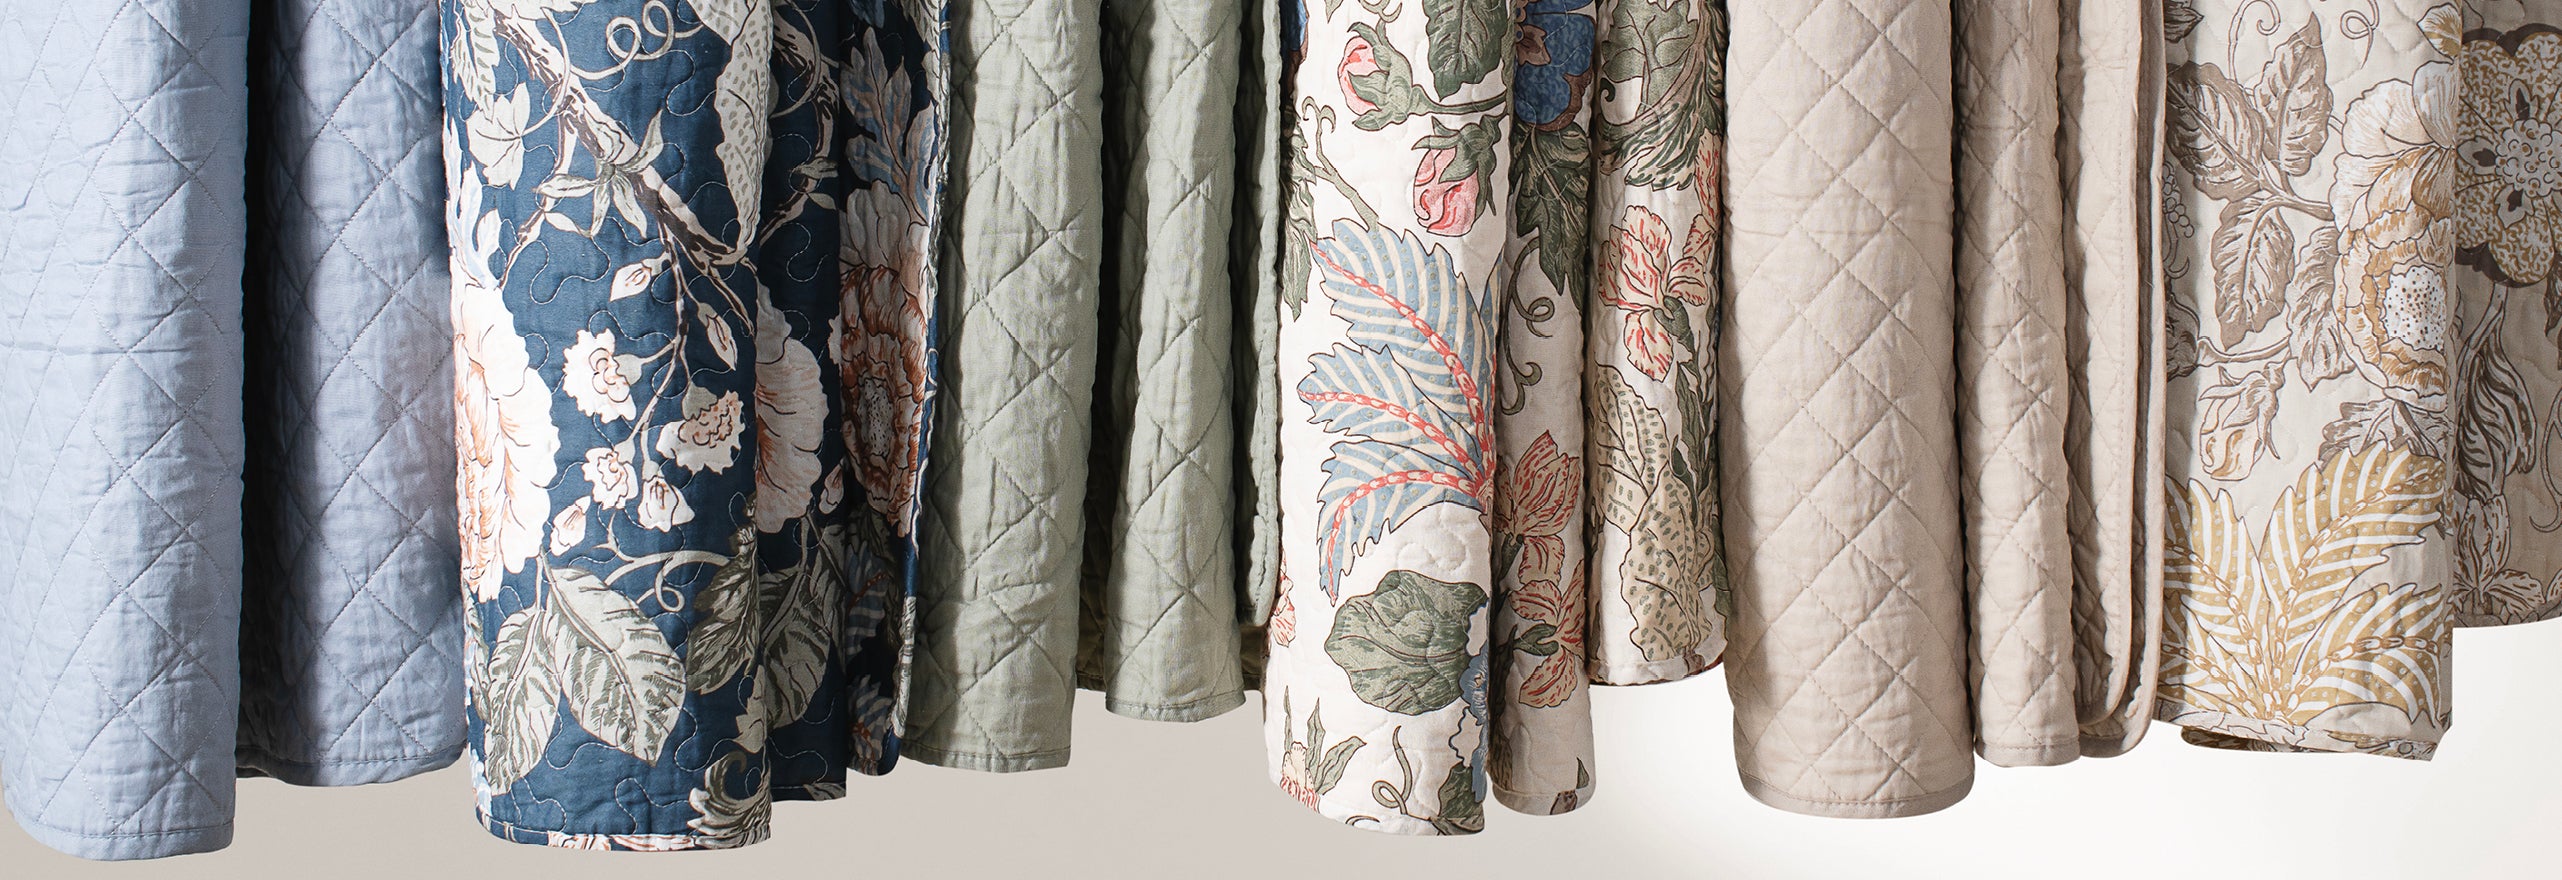 Soft quilts in Spring colors and patterns.